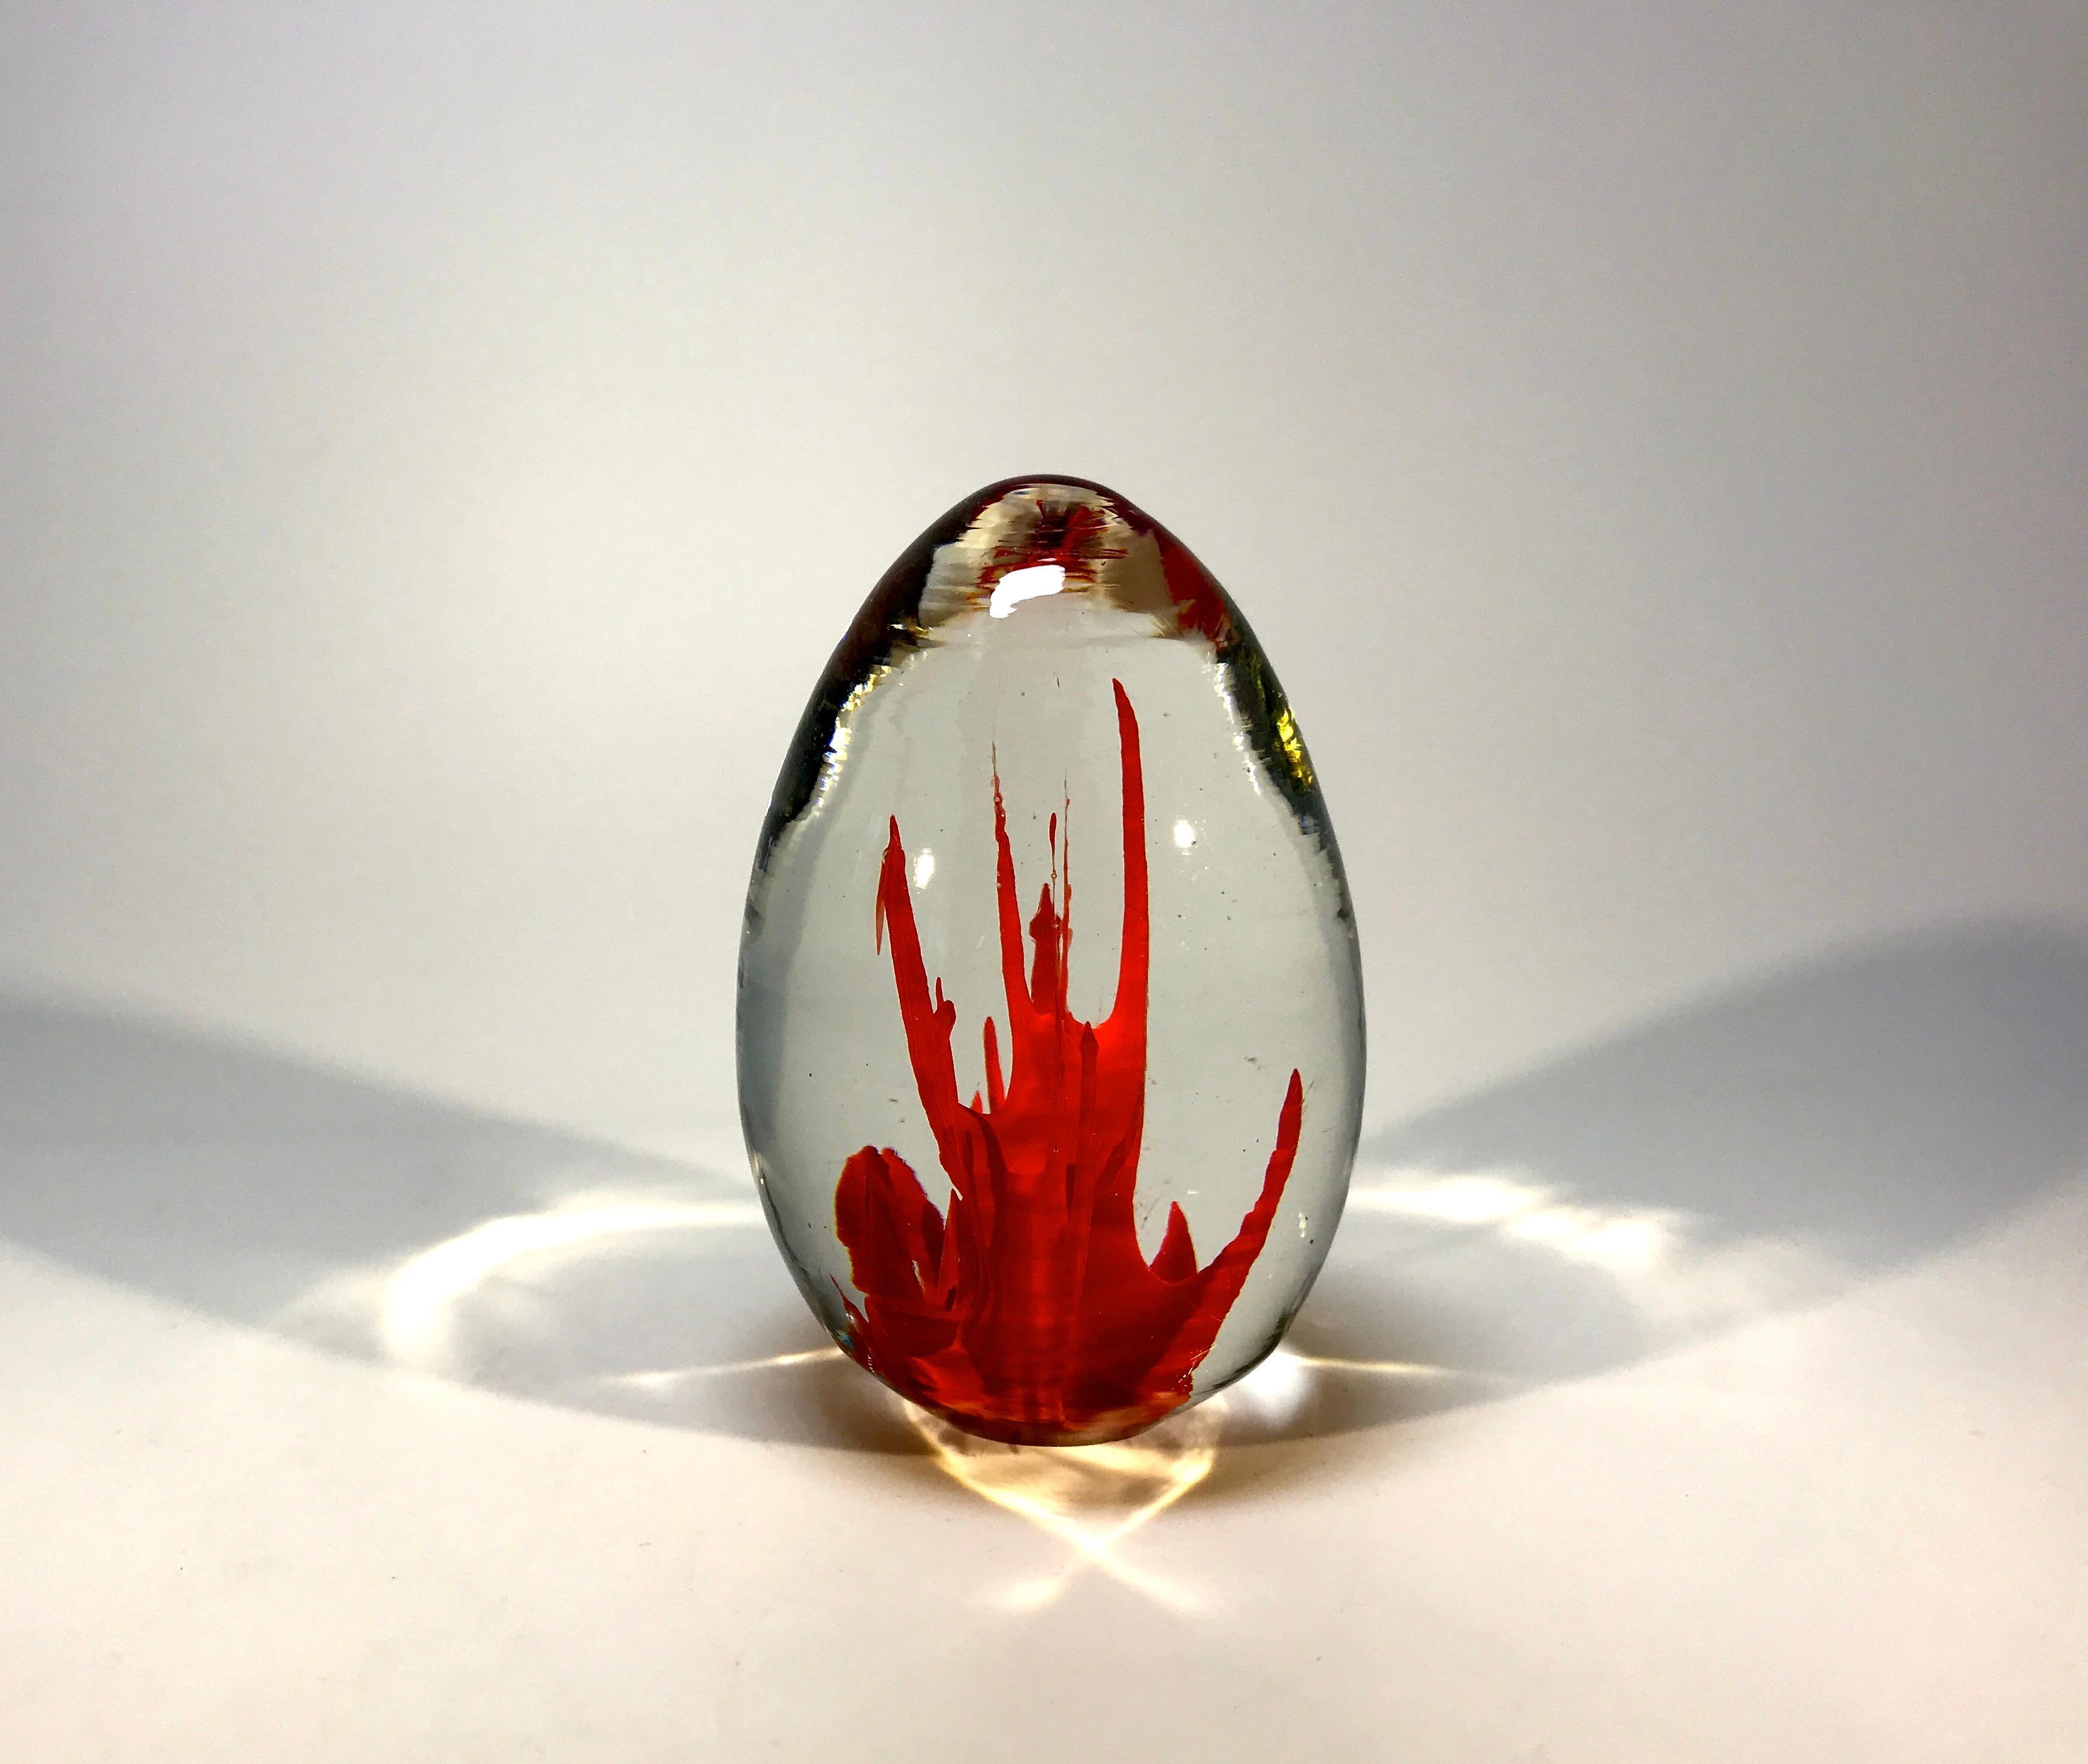 Fulvio Bianconi signed Venini hand blown egg paperweight with encased red coral form
Superb desk accessory
circa 1960s
Signed Venini, Italia, to base
Measures: Height 3 inch, width 2 inch
Very good condition with minor light scratches to the